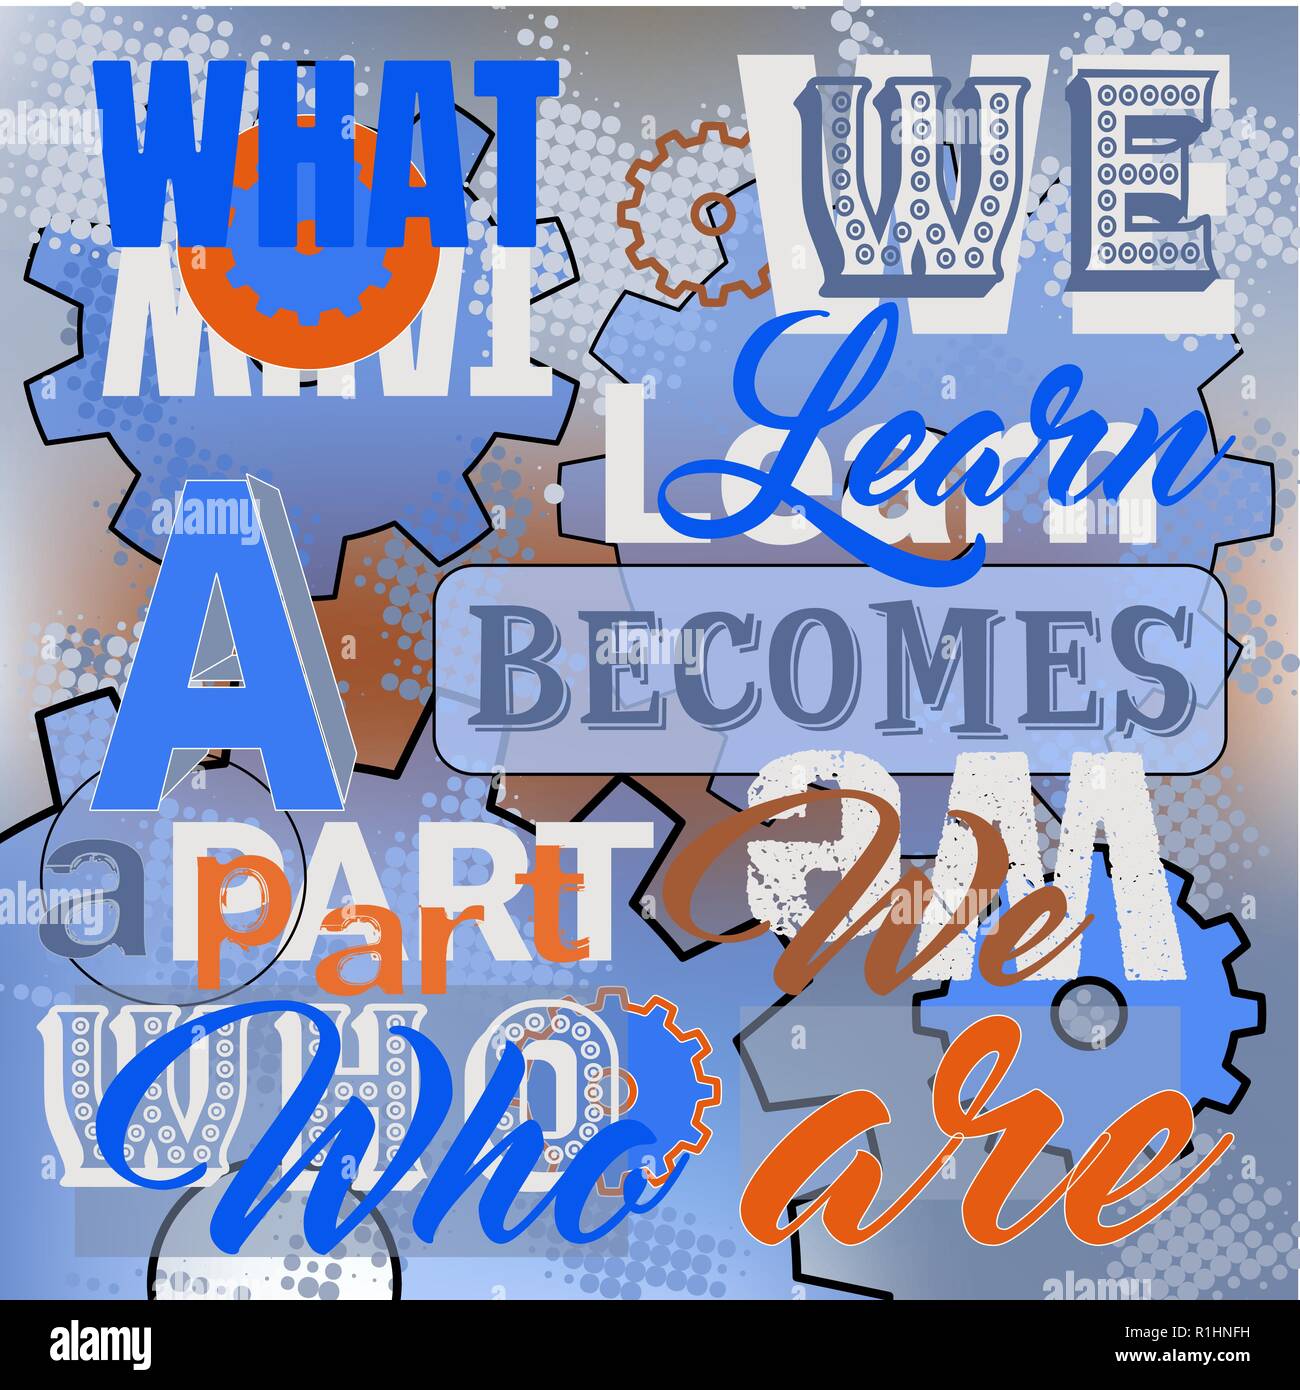 What we learn becomes what we are. Inspirational saying. Vector positive quote on colorful background with pixelated texture Stock Vector